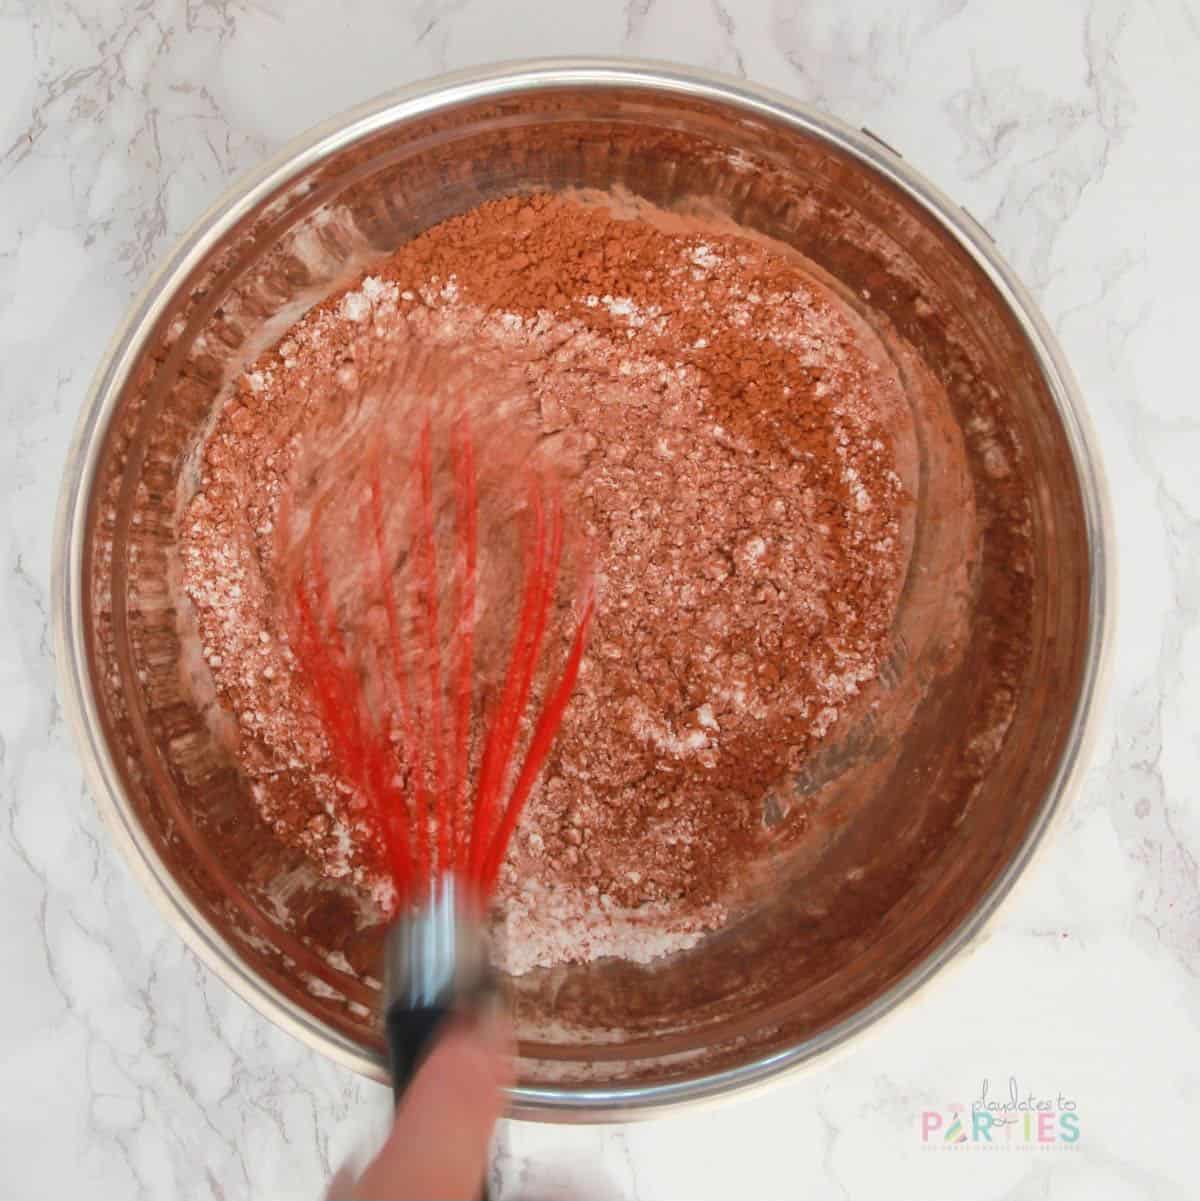 Whisking dry ingredients for chocolate whipped cream frosting.